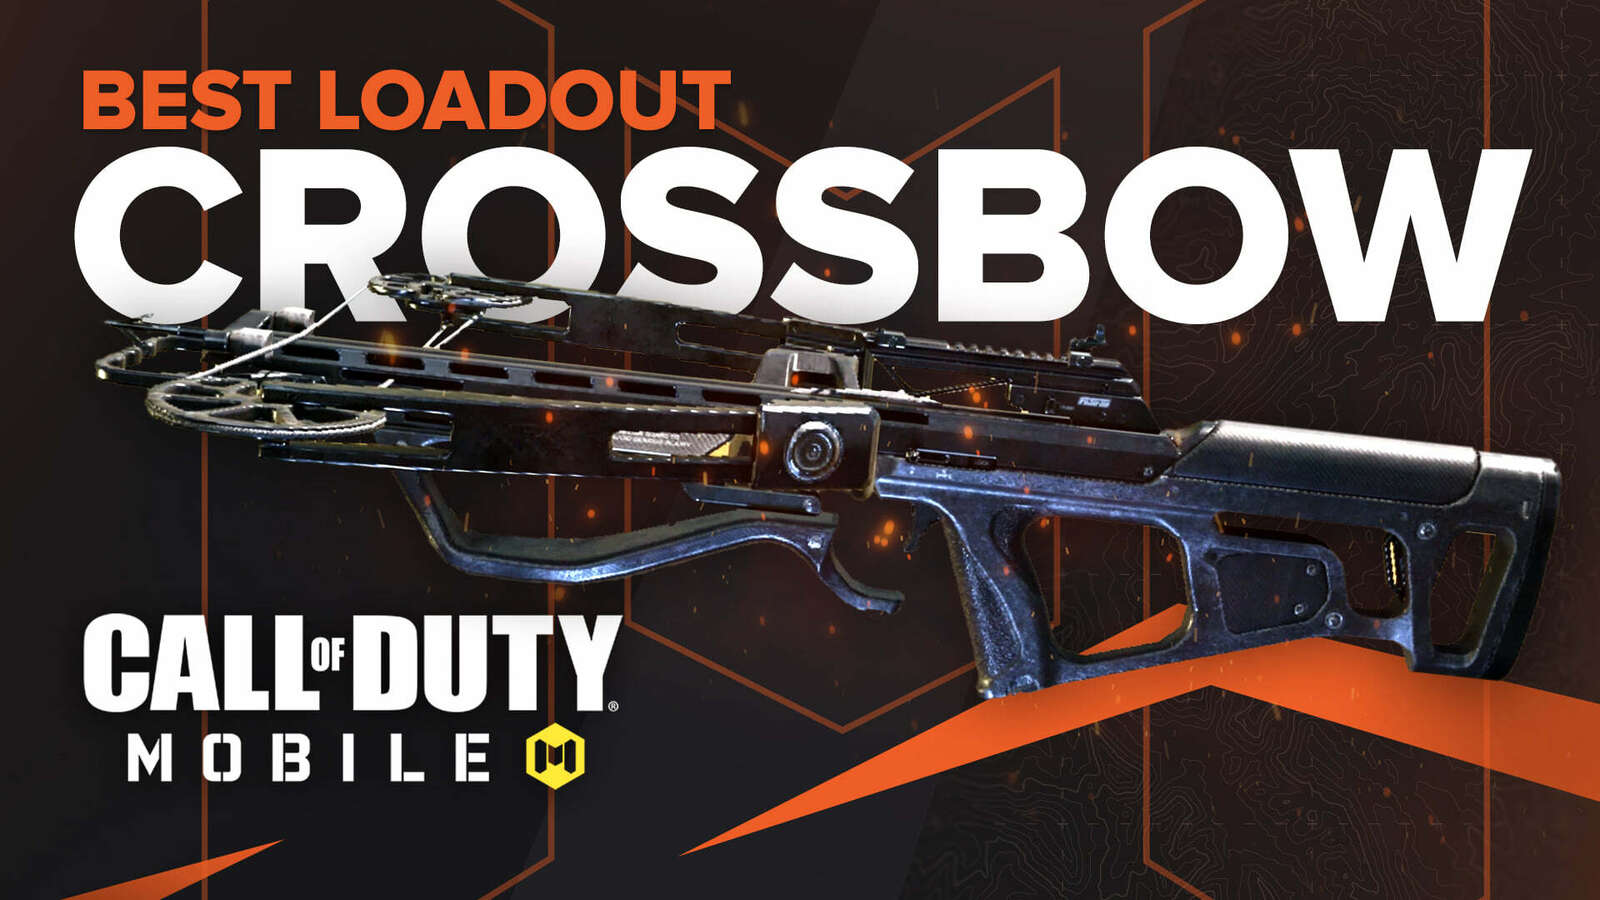 The Best Crossbow Loadout in Call of Duty Mobile